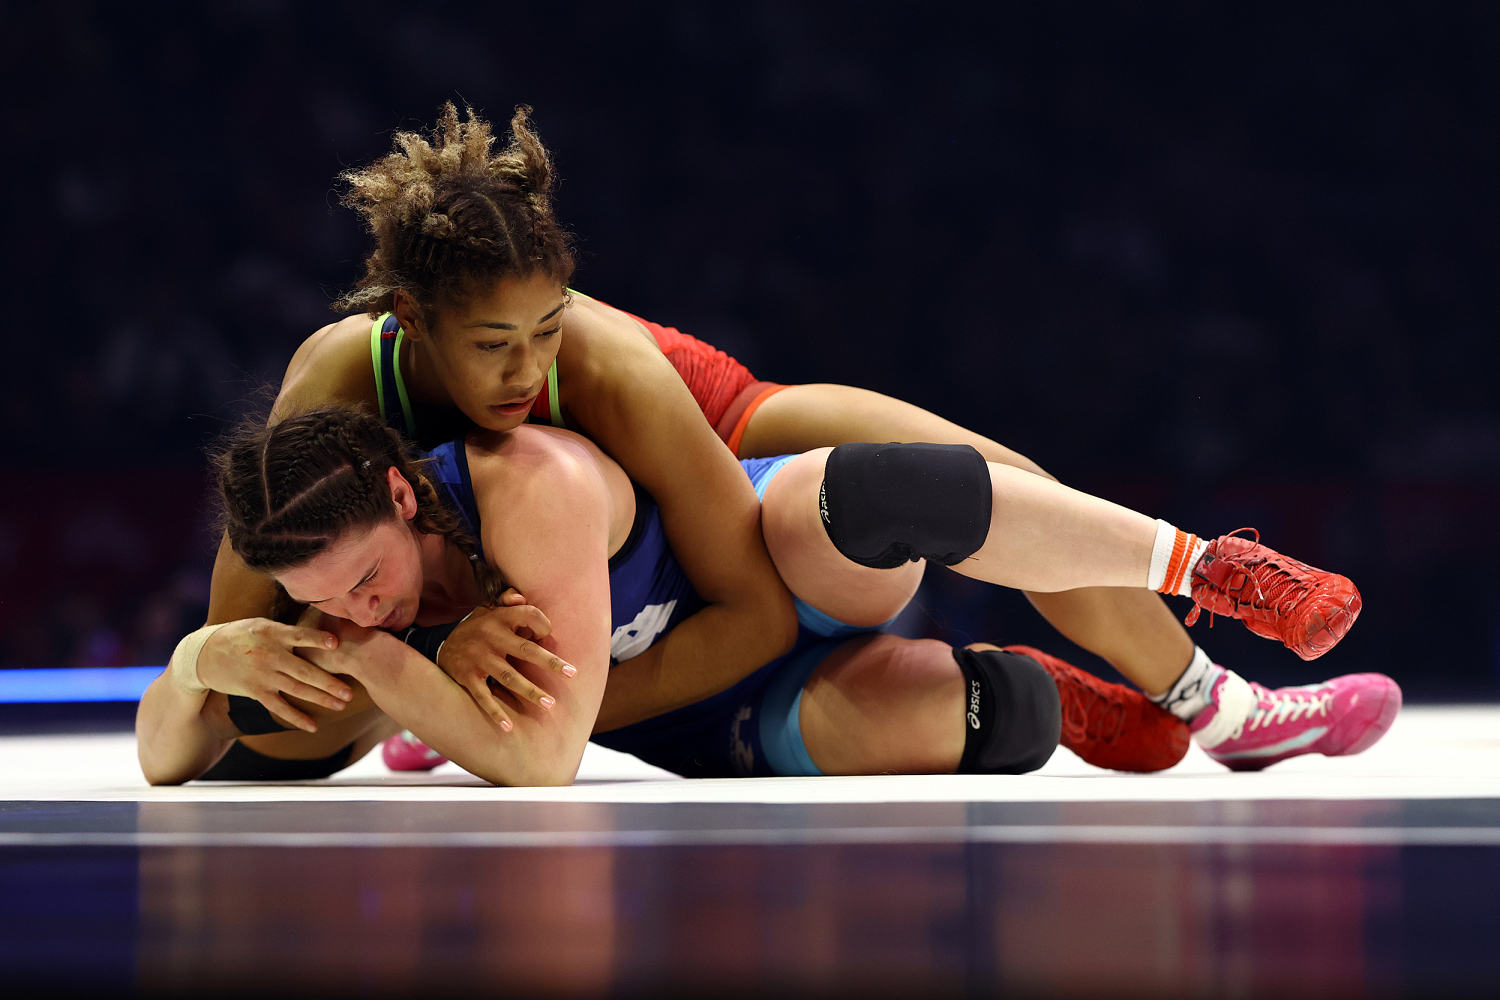 Drawn to wrestling as a child, Kennedy Blades has been dreaming of Olympic gold since she 8 years old